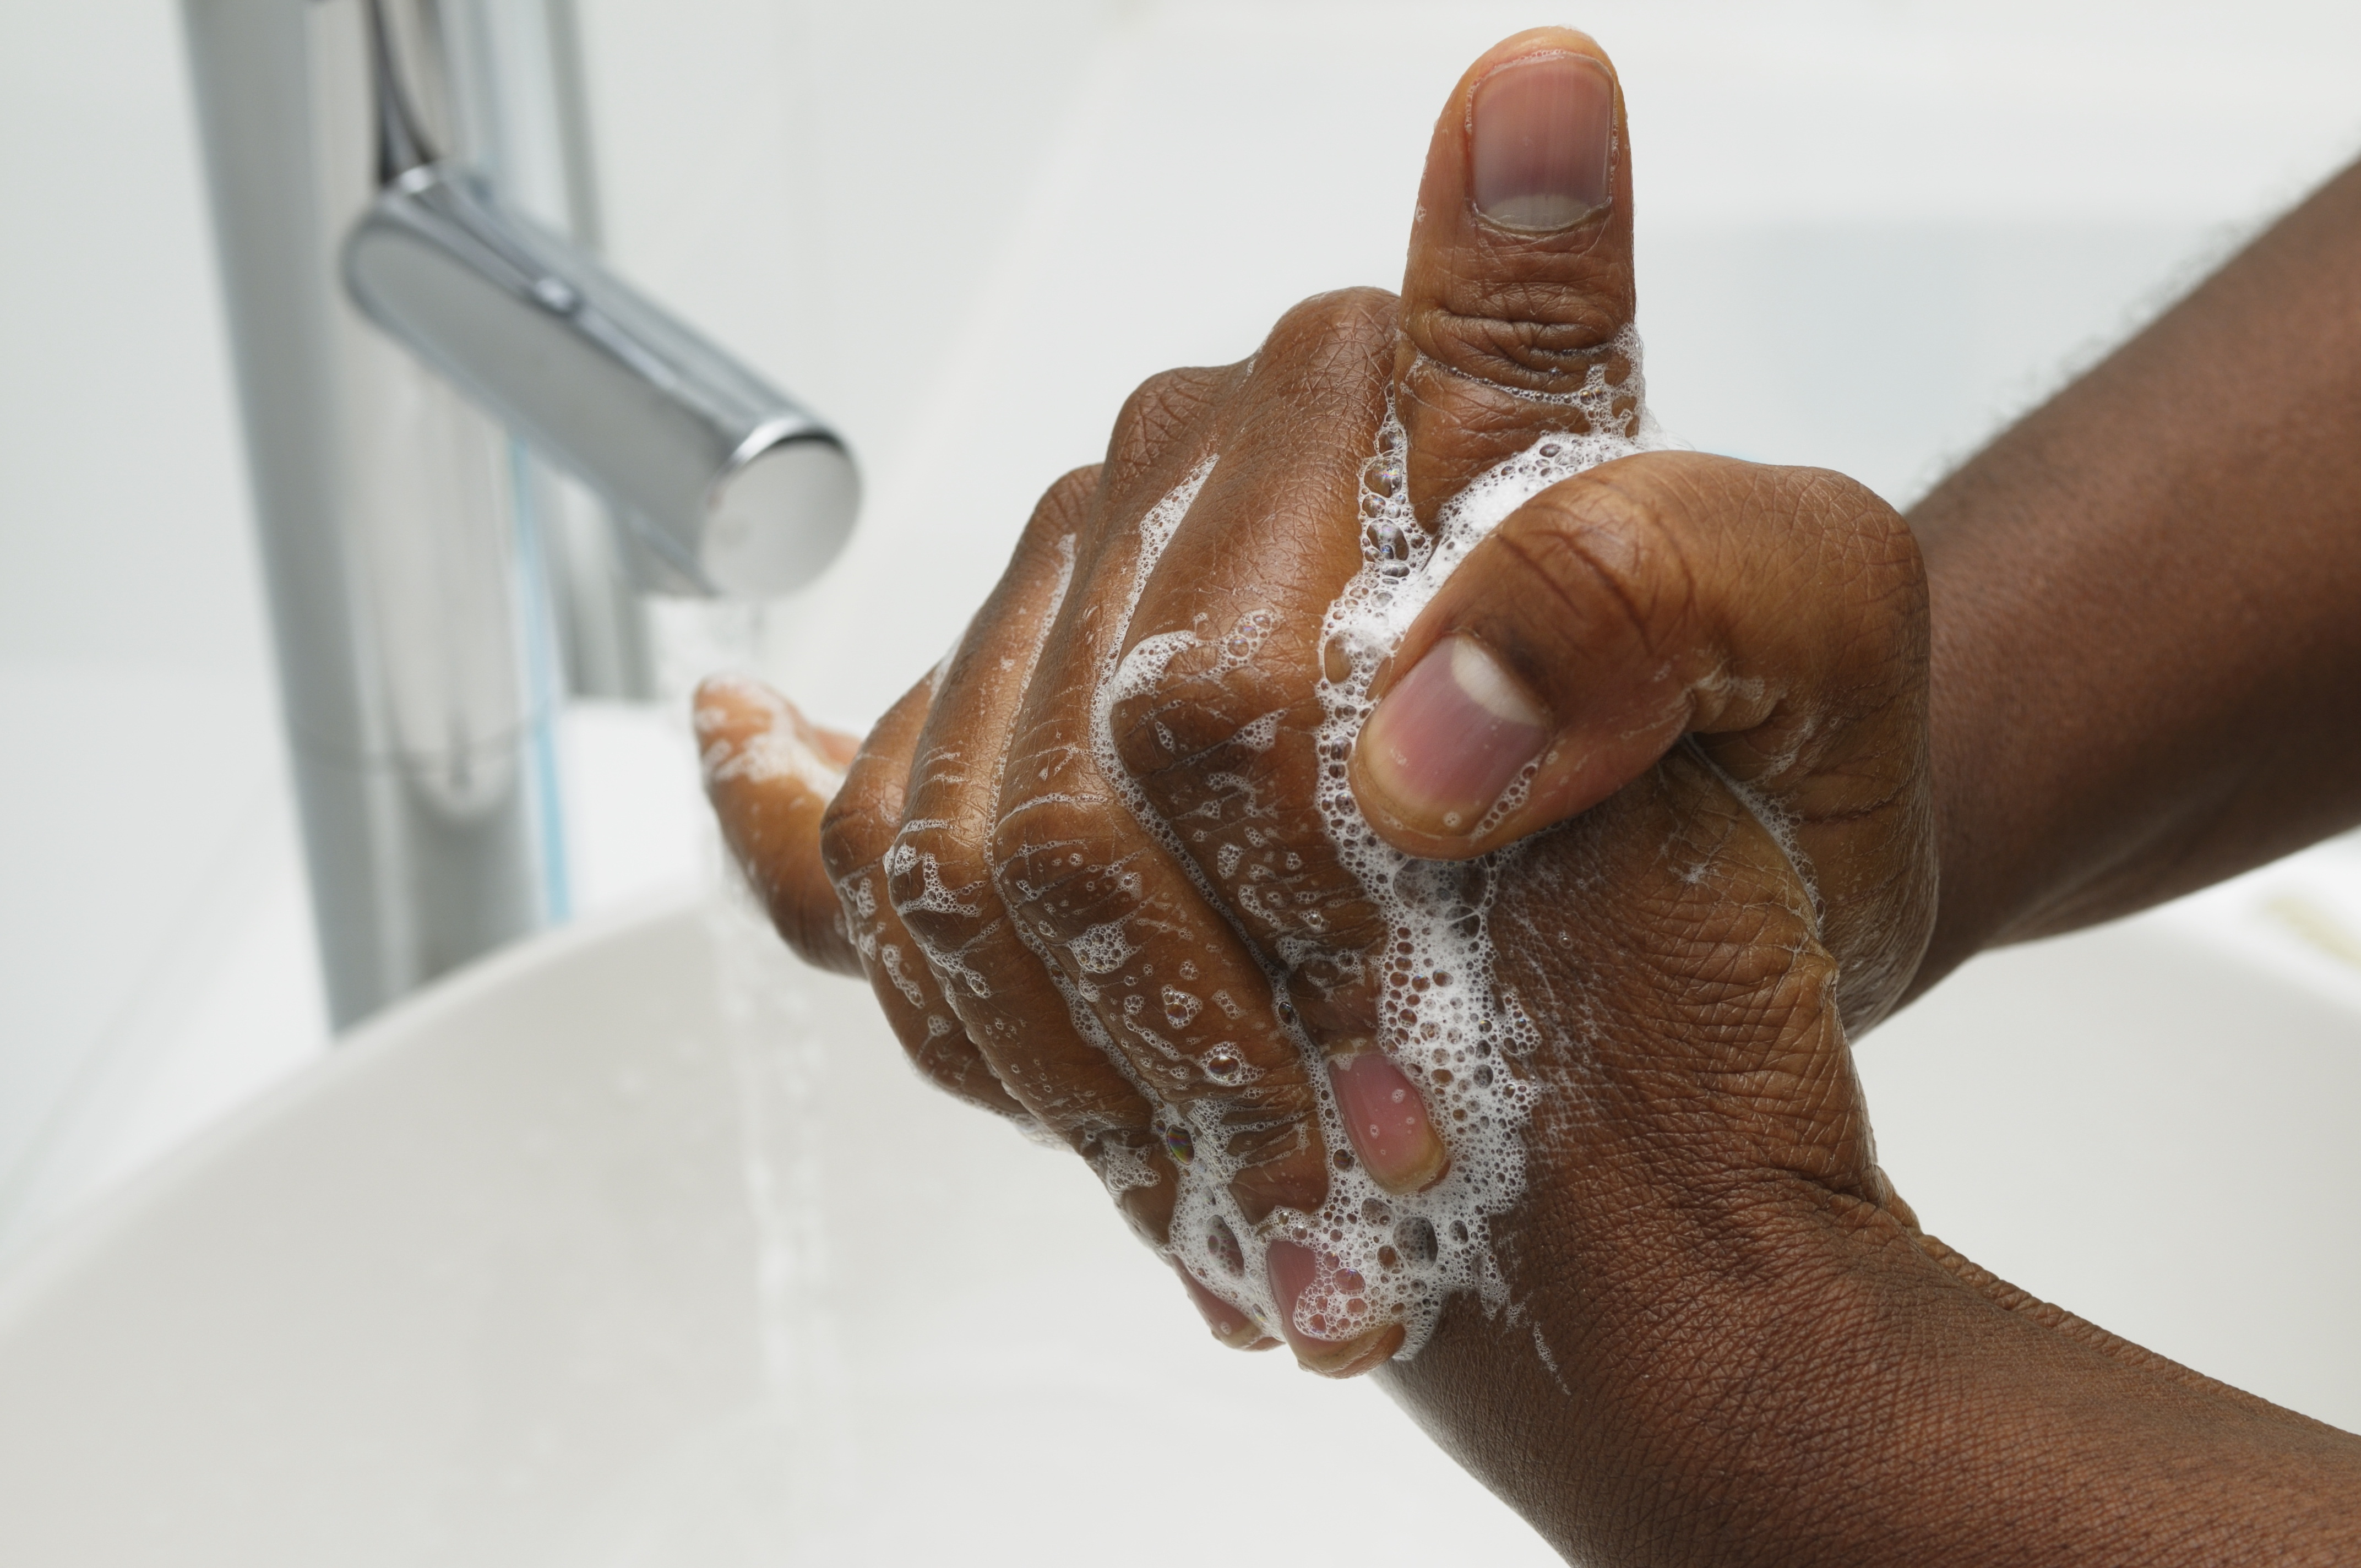 Eczema and Washing Hands Frequently